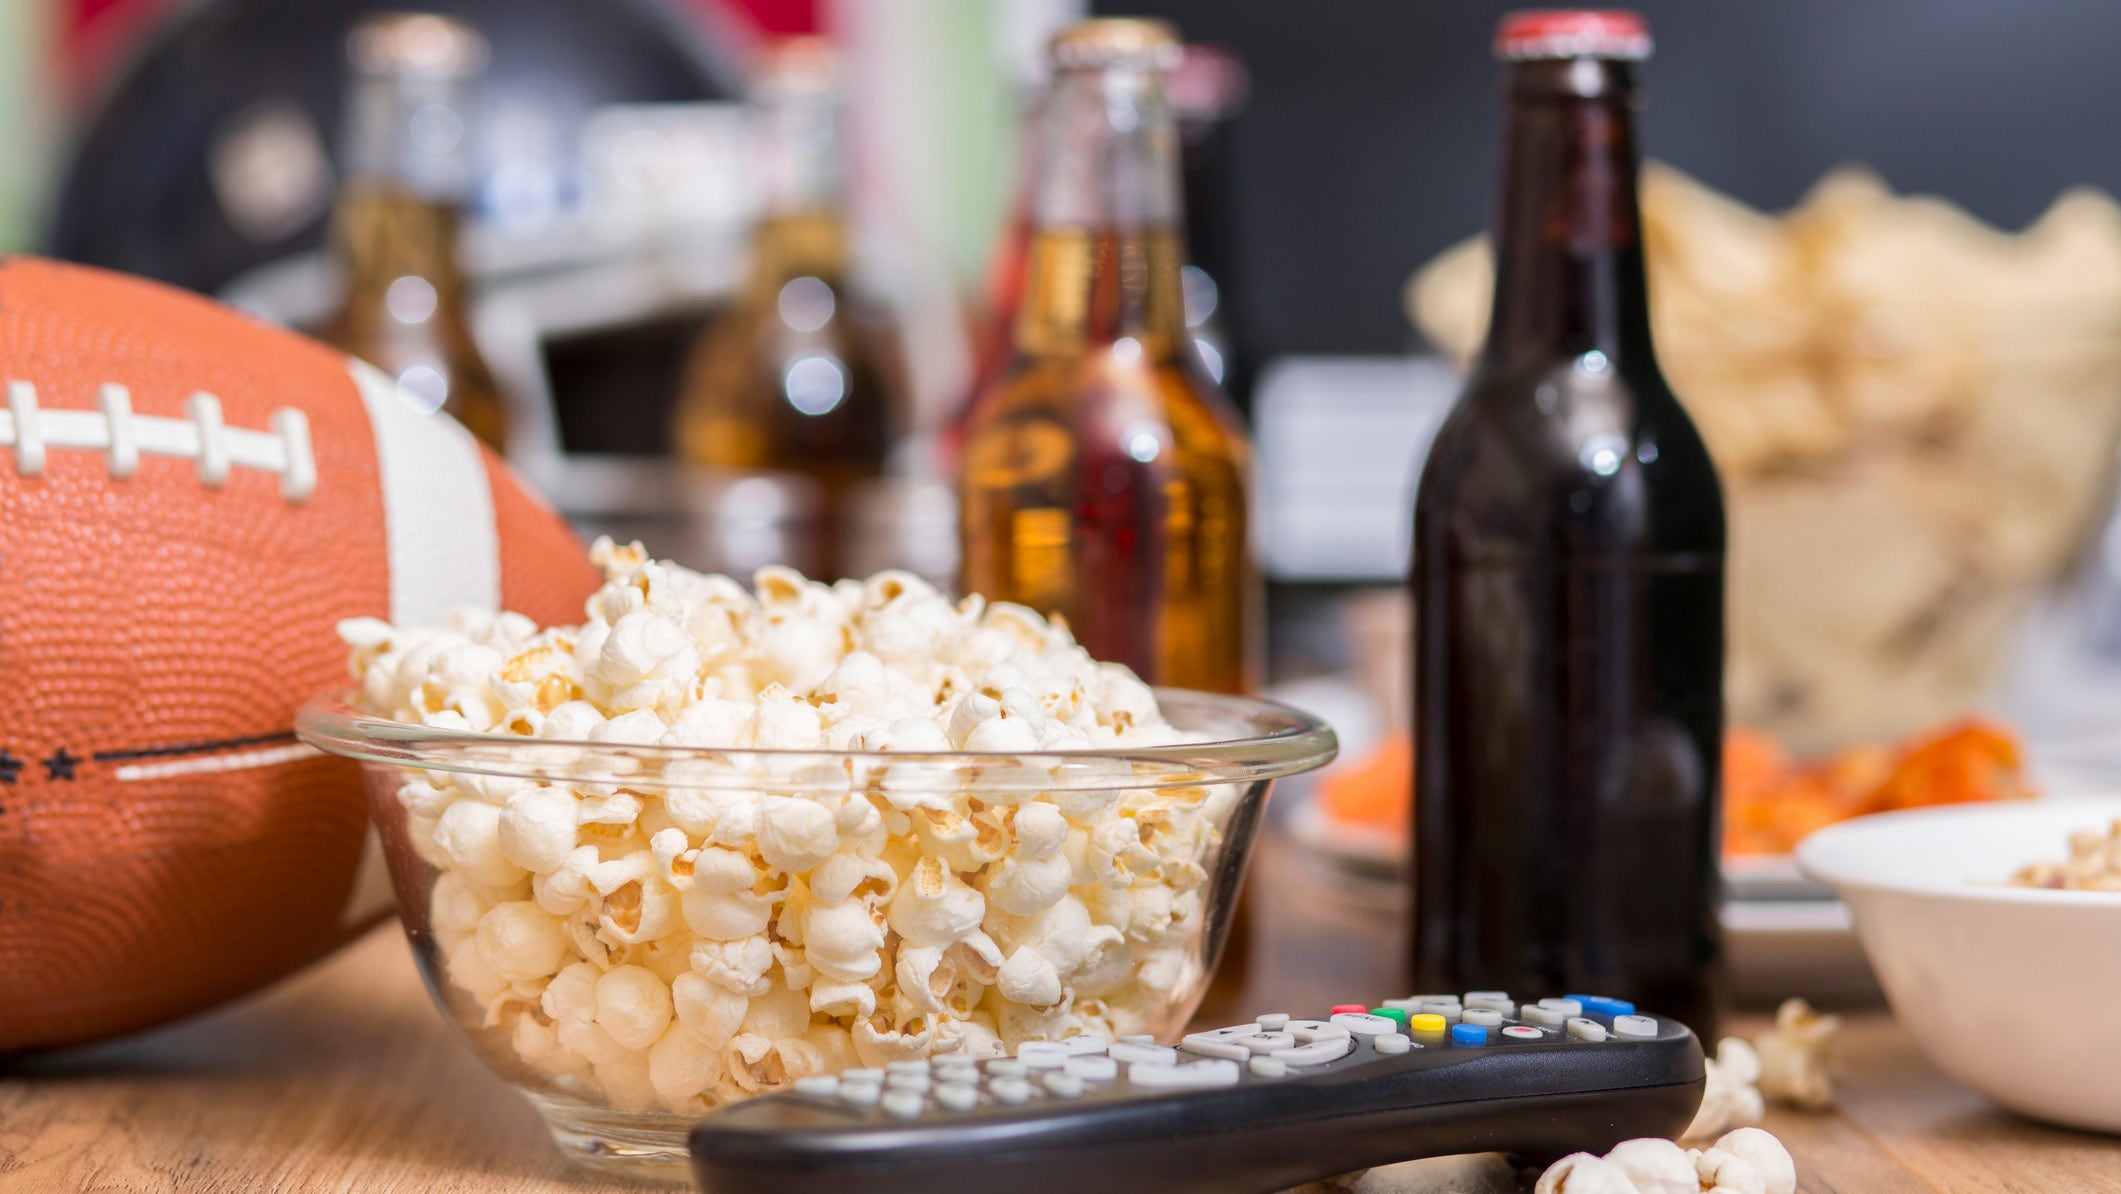 9 Amazon essentials for your Super Bowl party